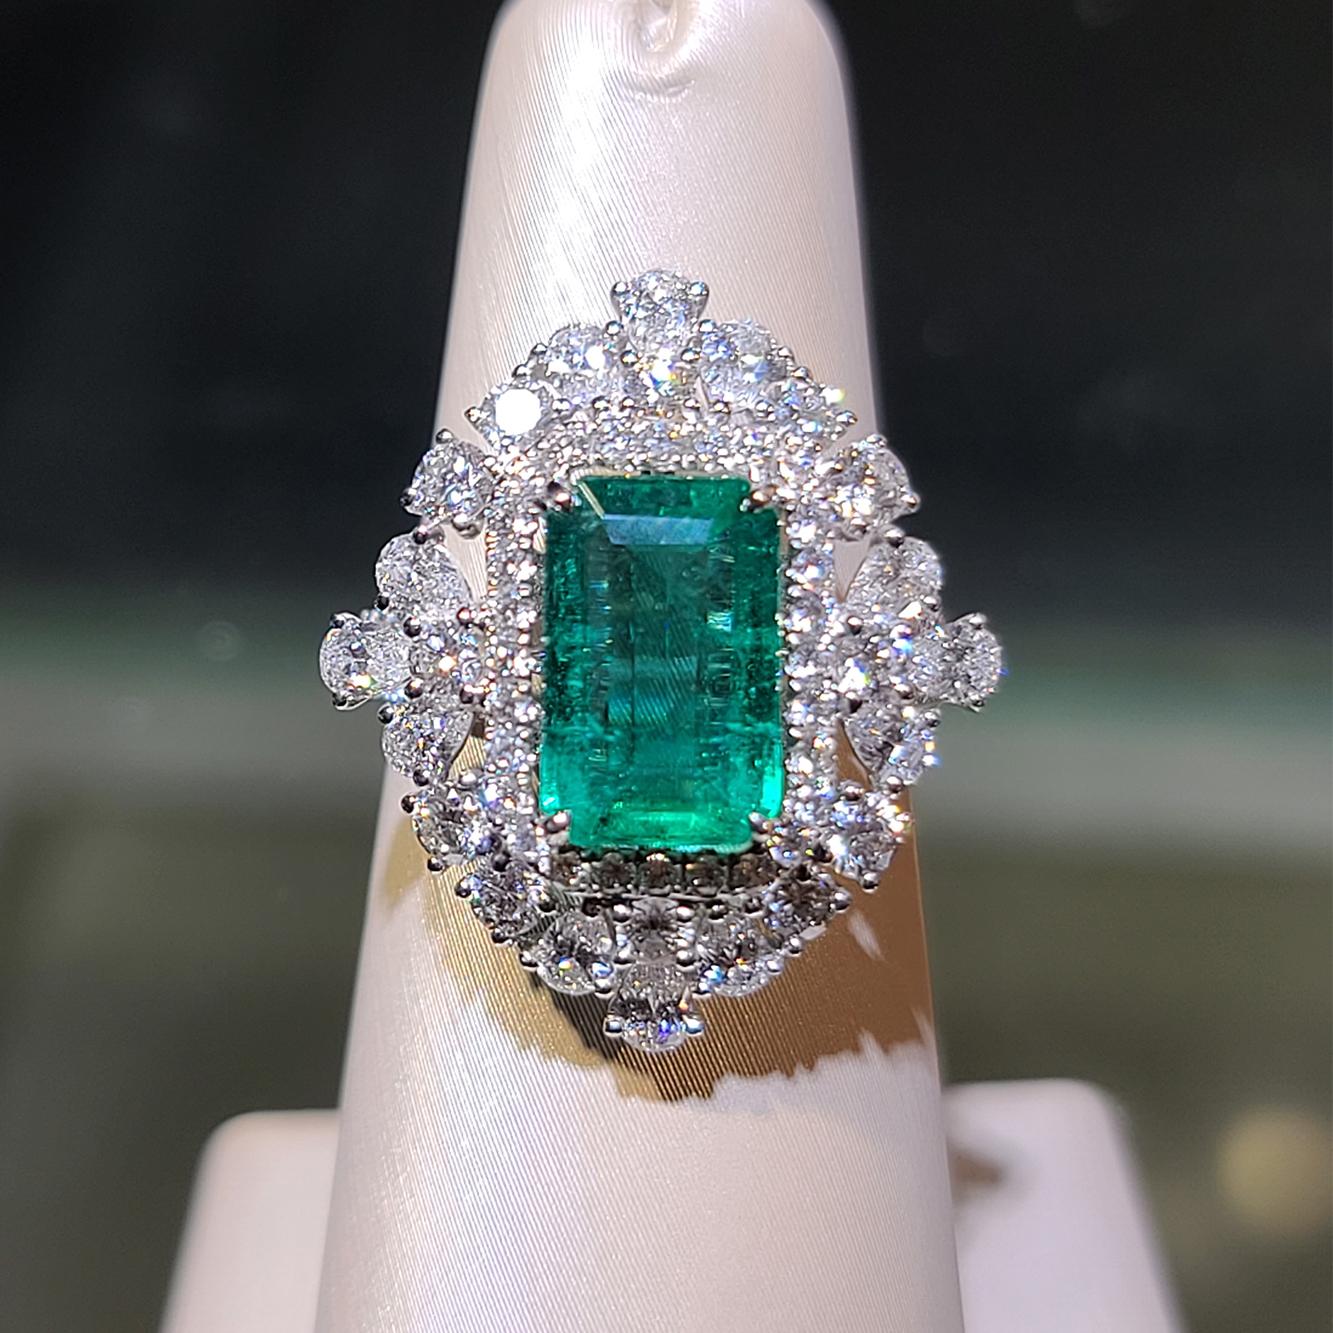 1 Em - 2.44ct   Guild 19199230   Intense Green / Min / Zambia
Carat Weight: 2.44ct  / Shape and cut: Octagonal / Step
Colour: Intense Green
Treatment: Minor
Origin: Zambia
Cert: Guild 19199230 
Total Diamond Weight: 2.38t / Dia 104 pcs
Ring Size: